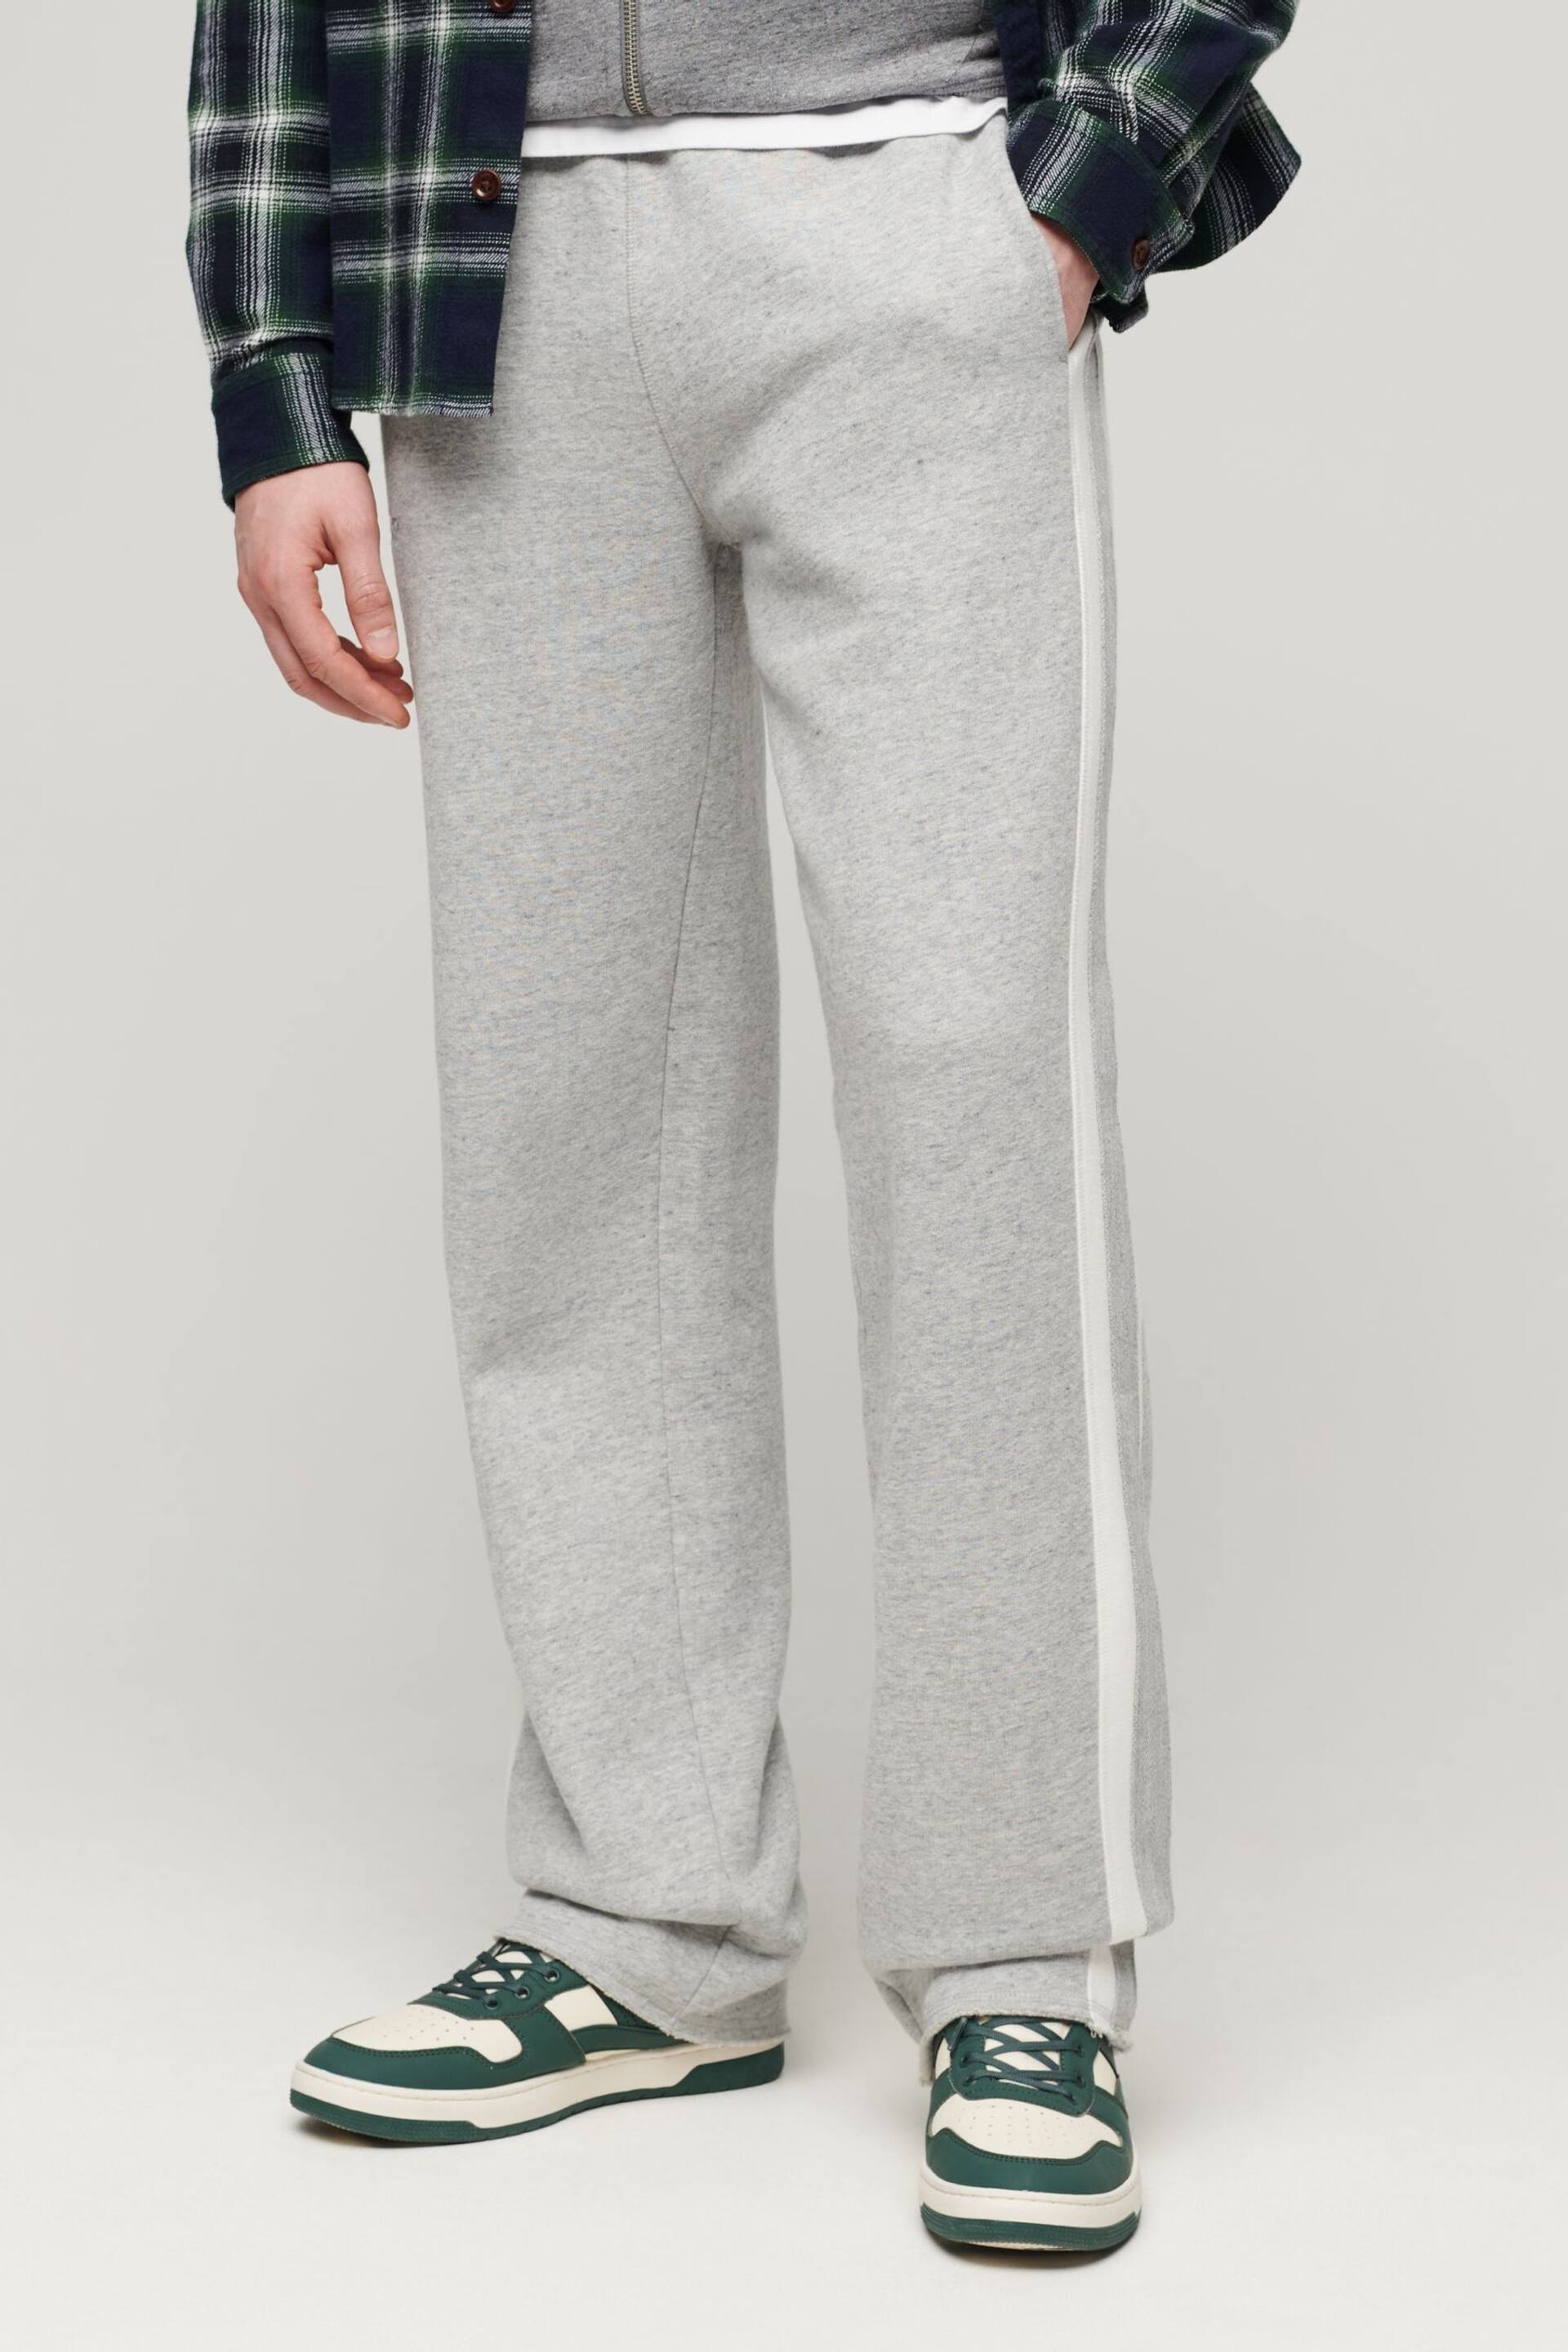 Superdry Grey Essential Straight Joggers - Image 3 of 9